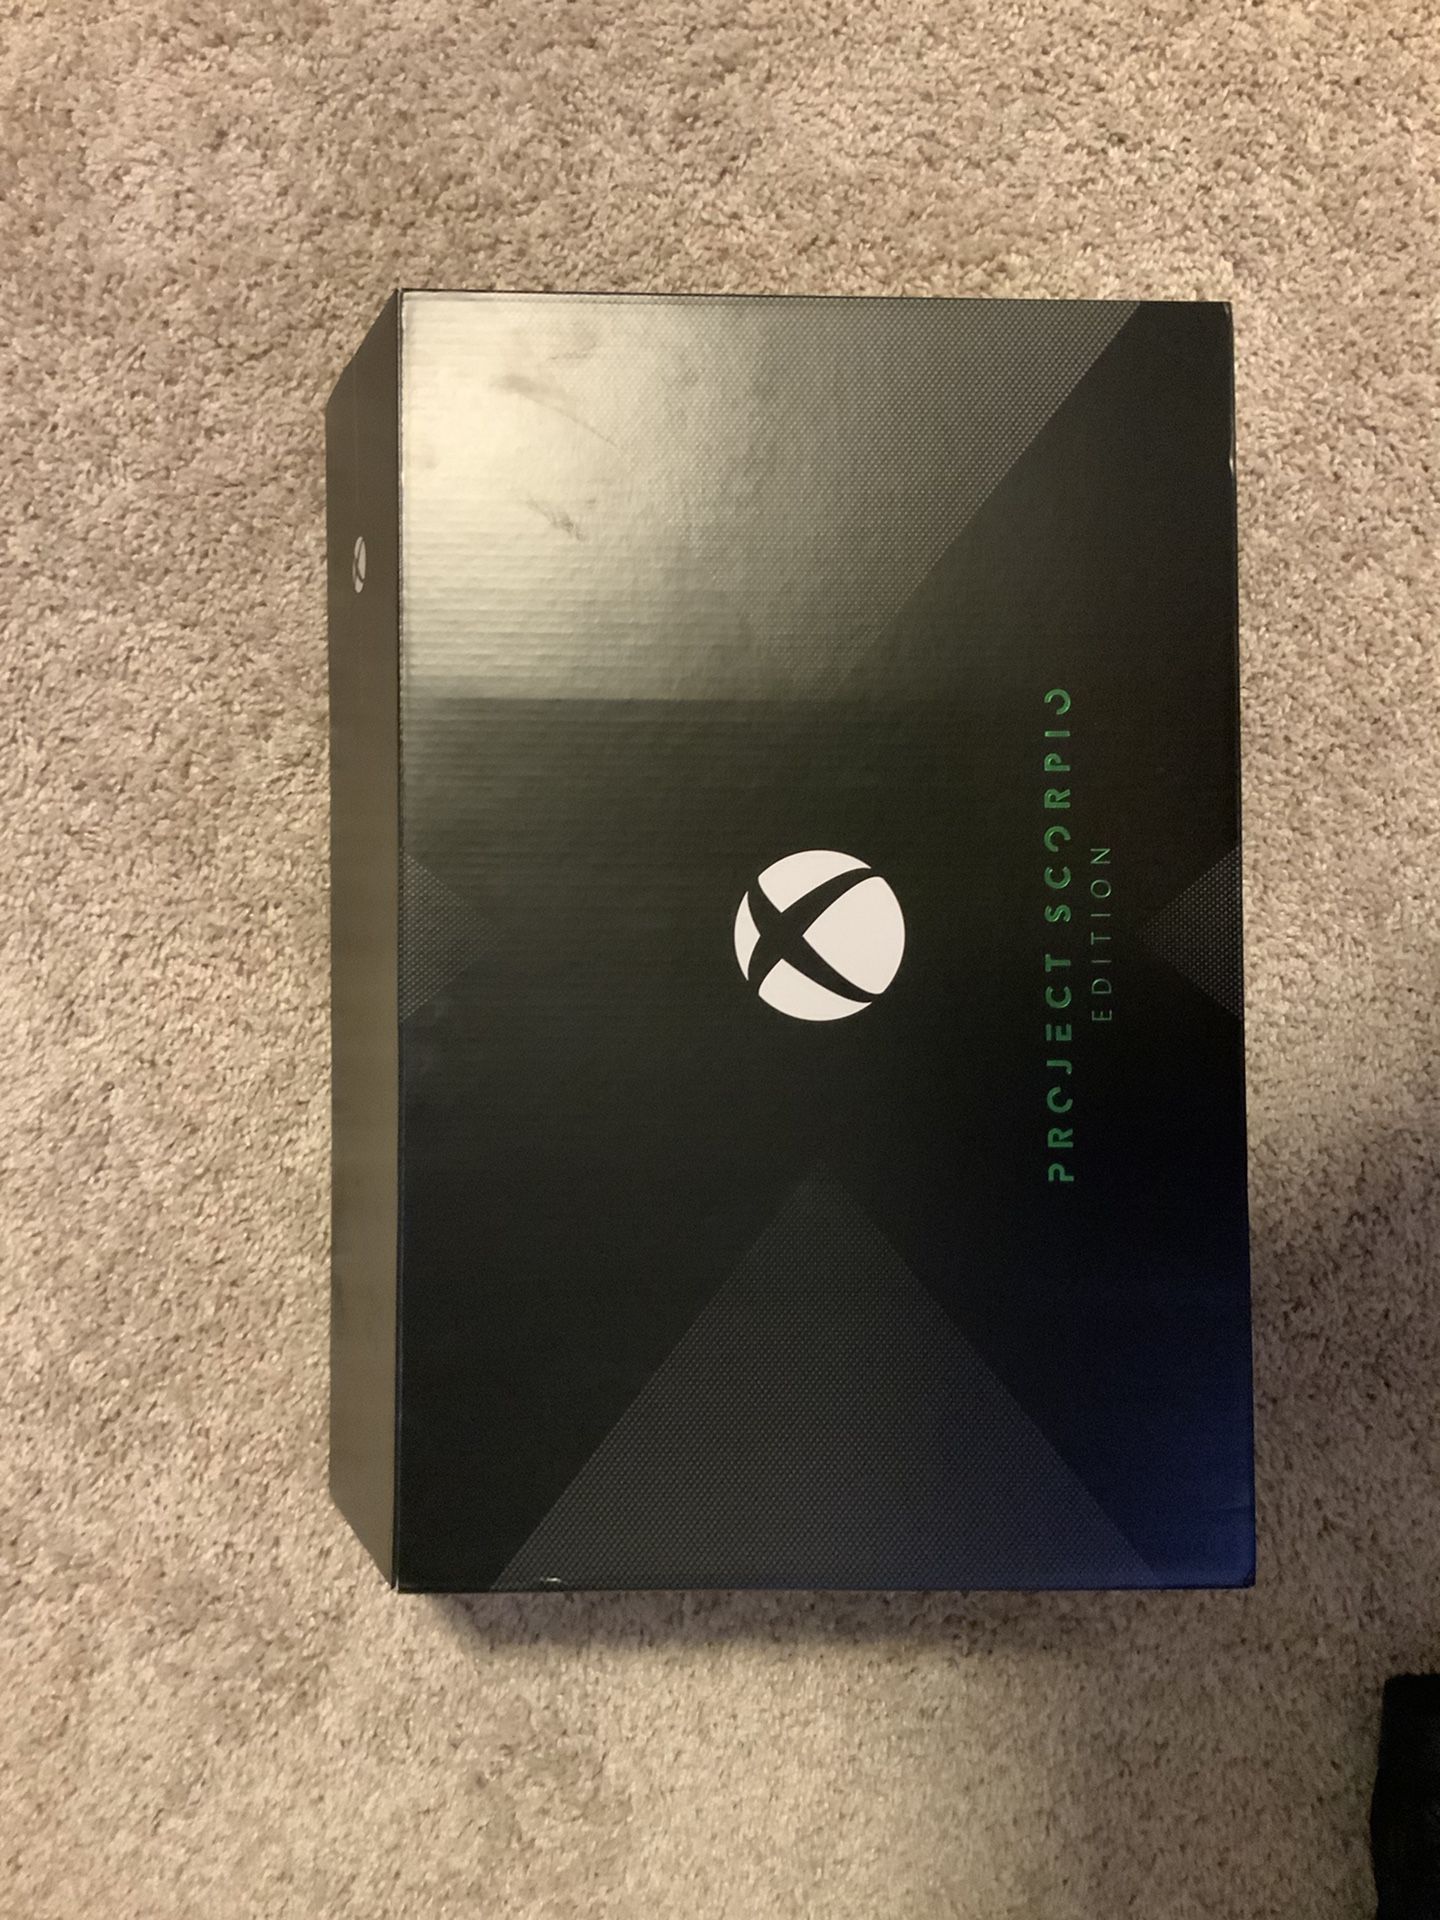 Xbox One X Project Scorpio Limited Edition